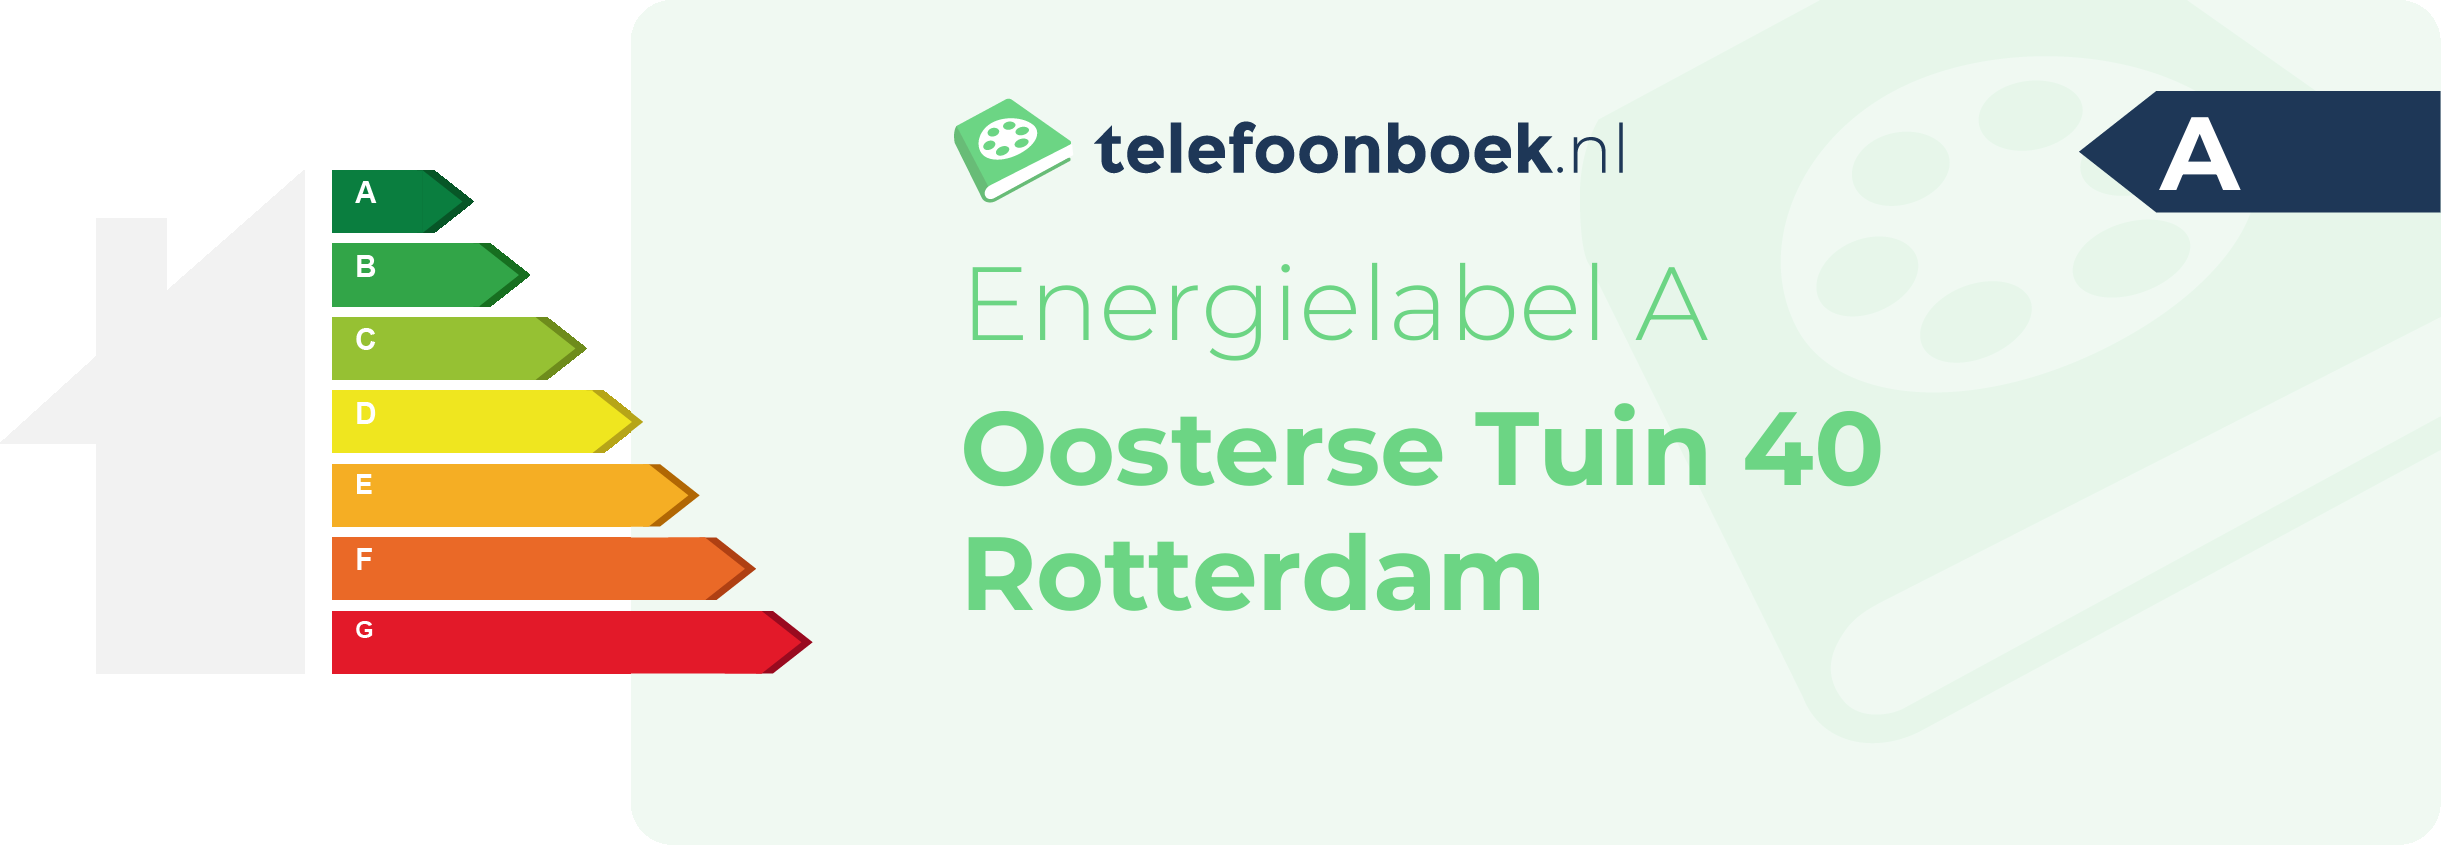 Energielabel Oosterse Tuin 40 Rotterdam